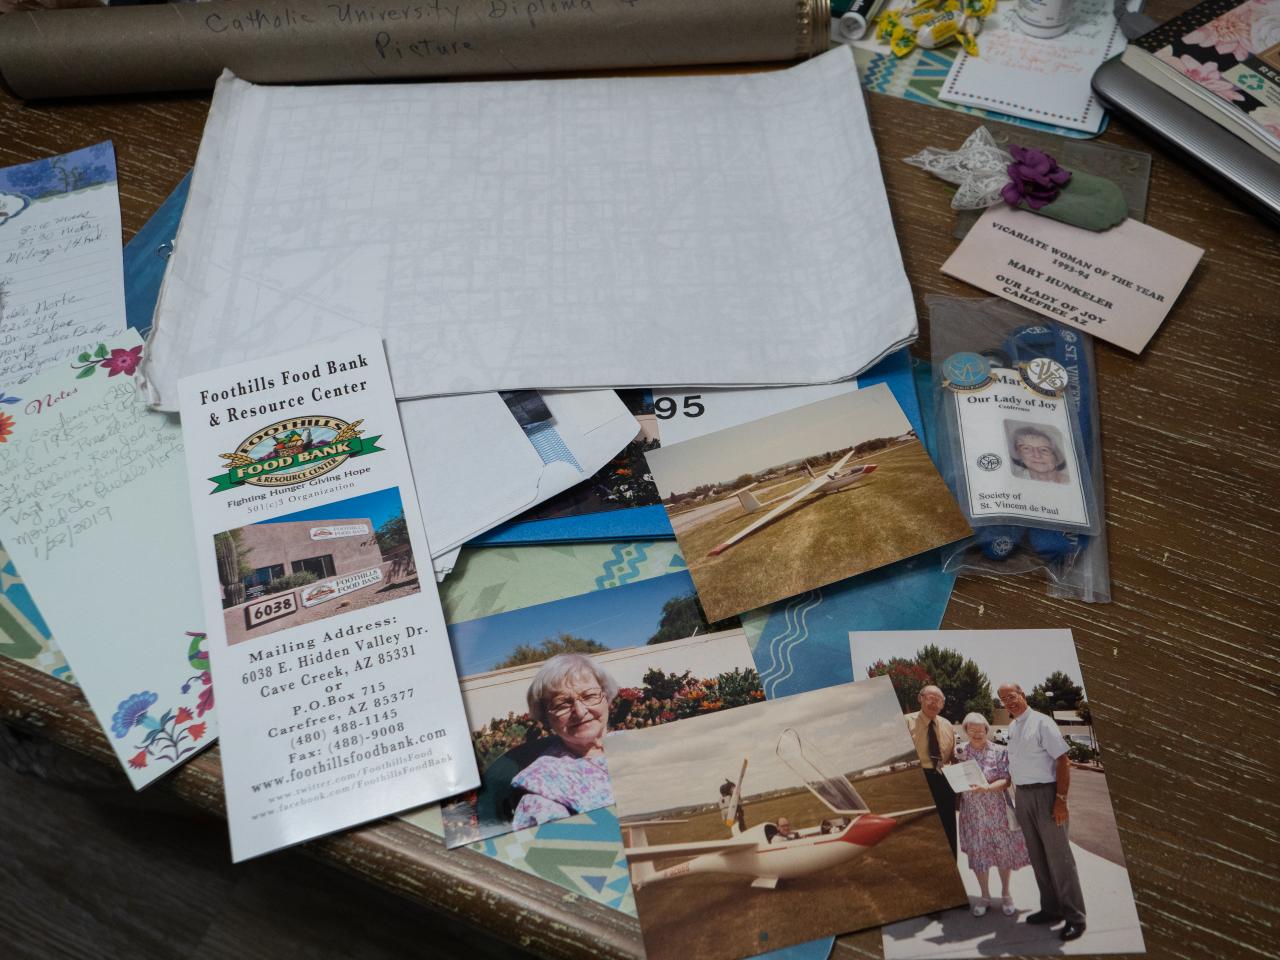 Papers and photos spread on a table